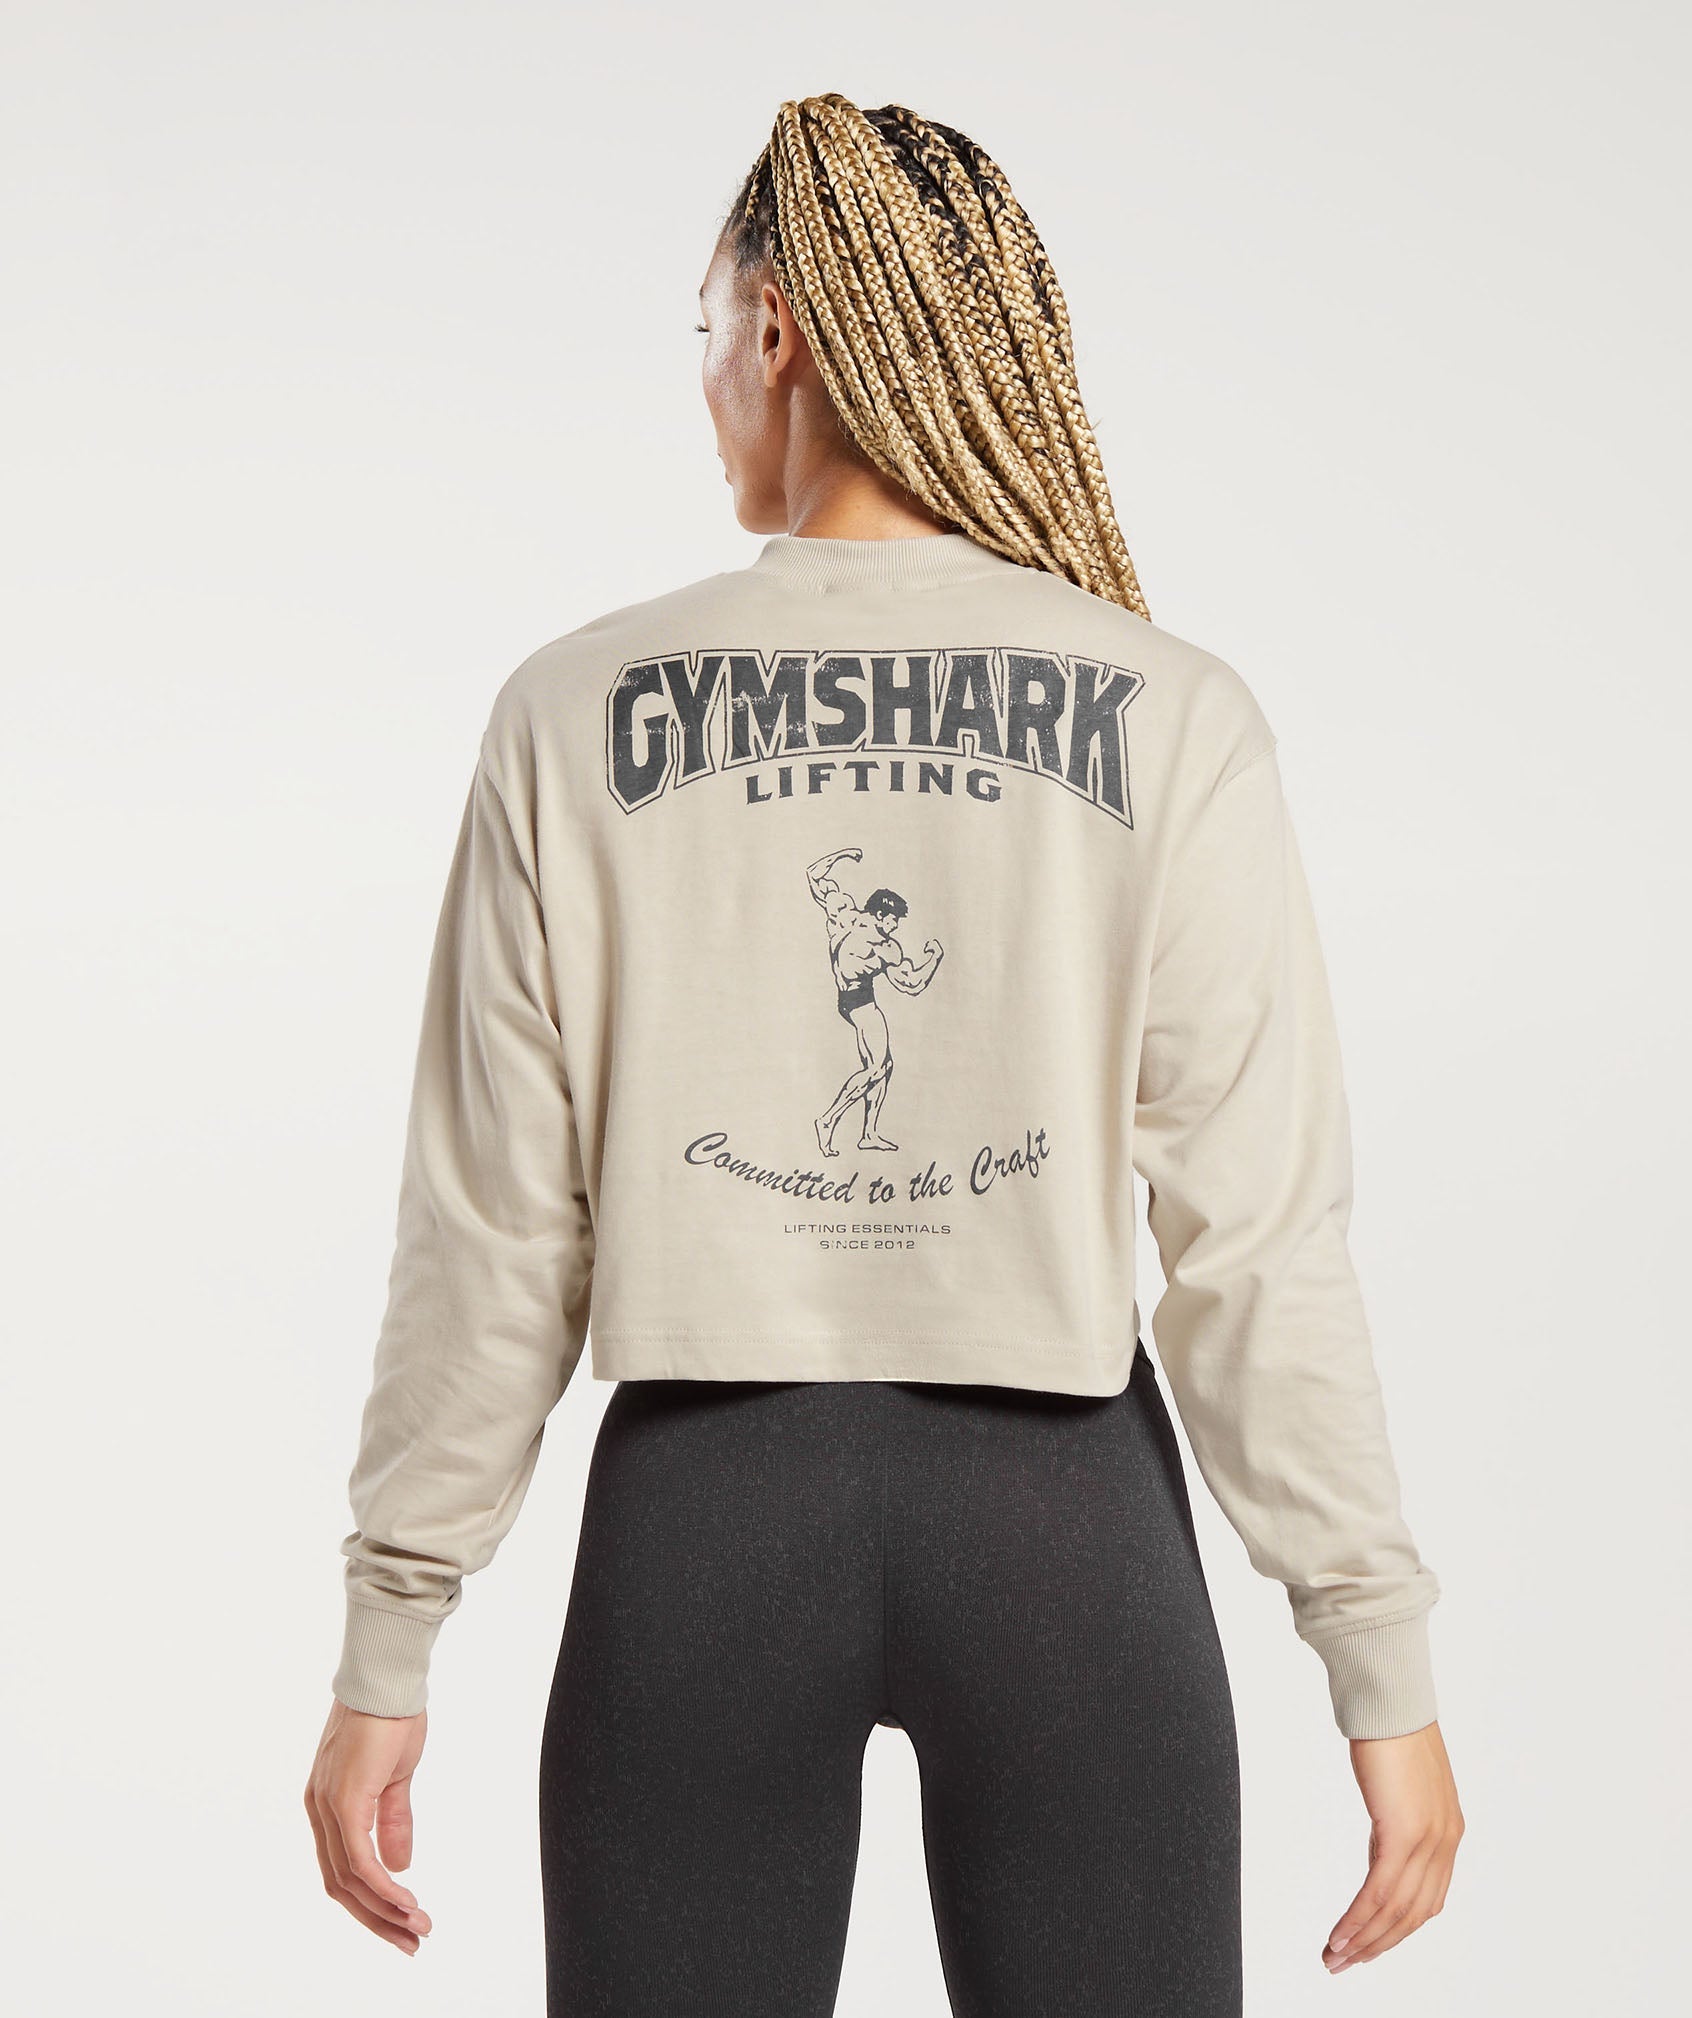 Committed To The Craft Long Sleeve Top in Brown